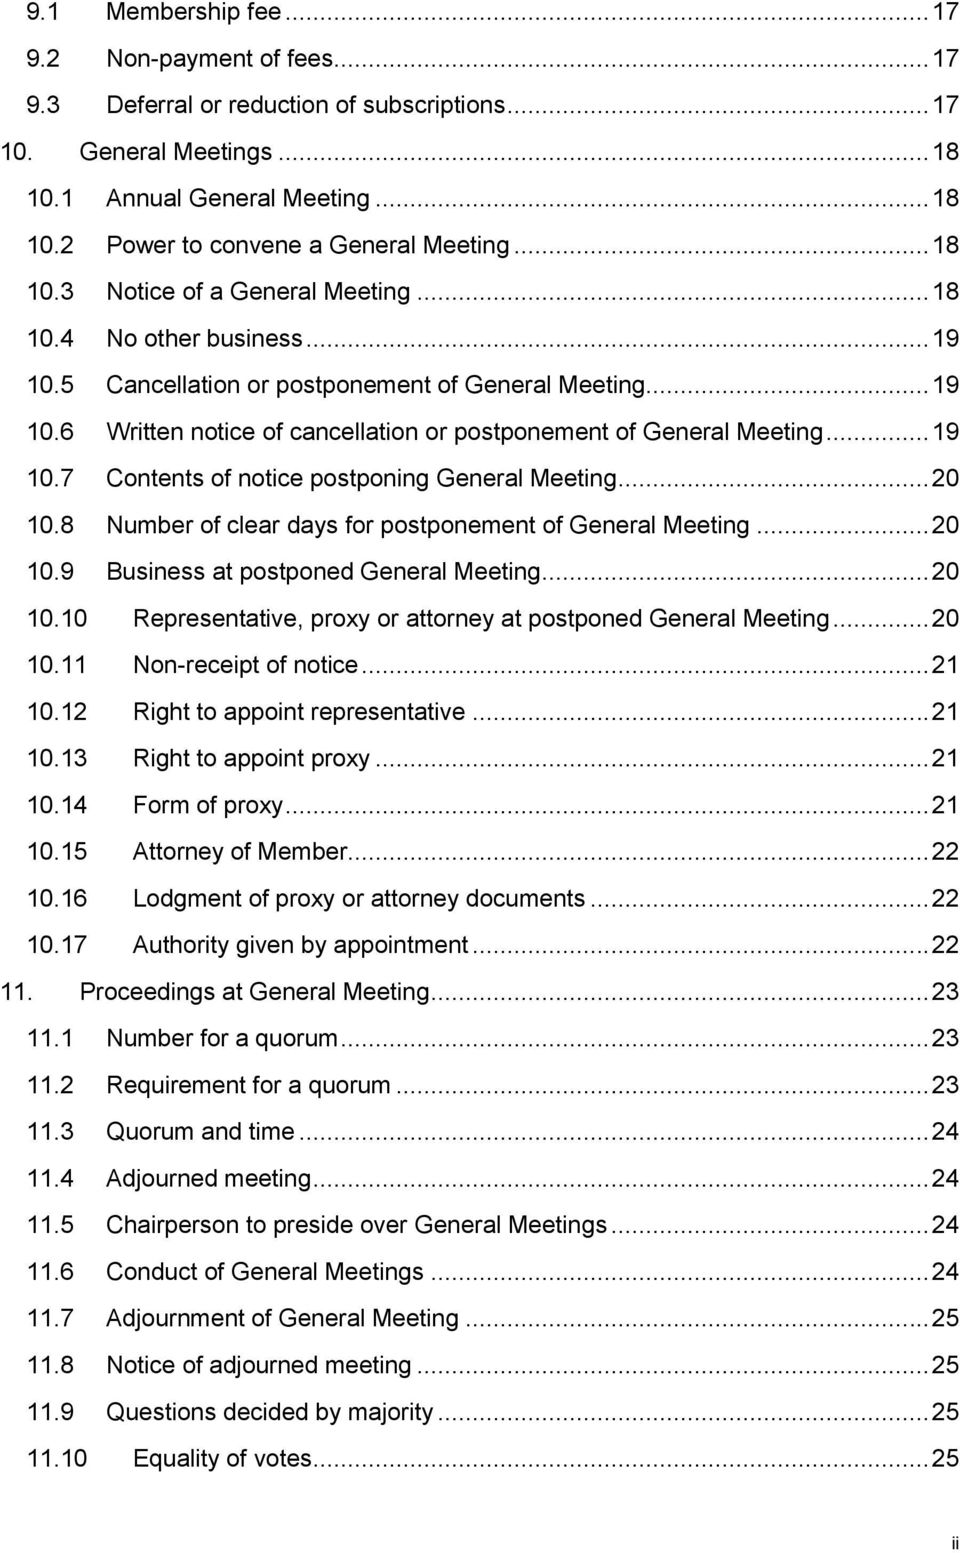 .. 19 10.7 Contents of notice postponing General Meeting... 20 10.8 Number of clear days for postponement of General Meeting... 20 10.9 Business at postponed General Meeting... 20 10.10 Representative, proxy or attorney at postponed General Meeting.